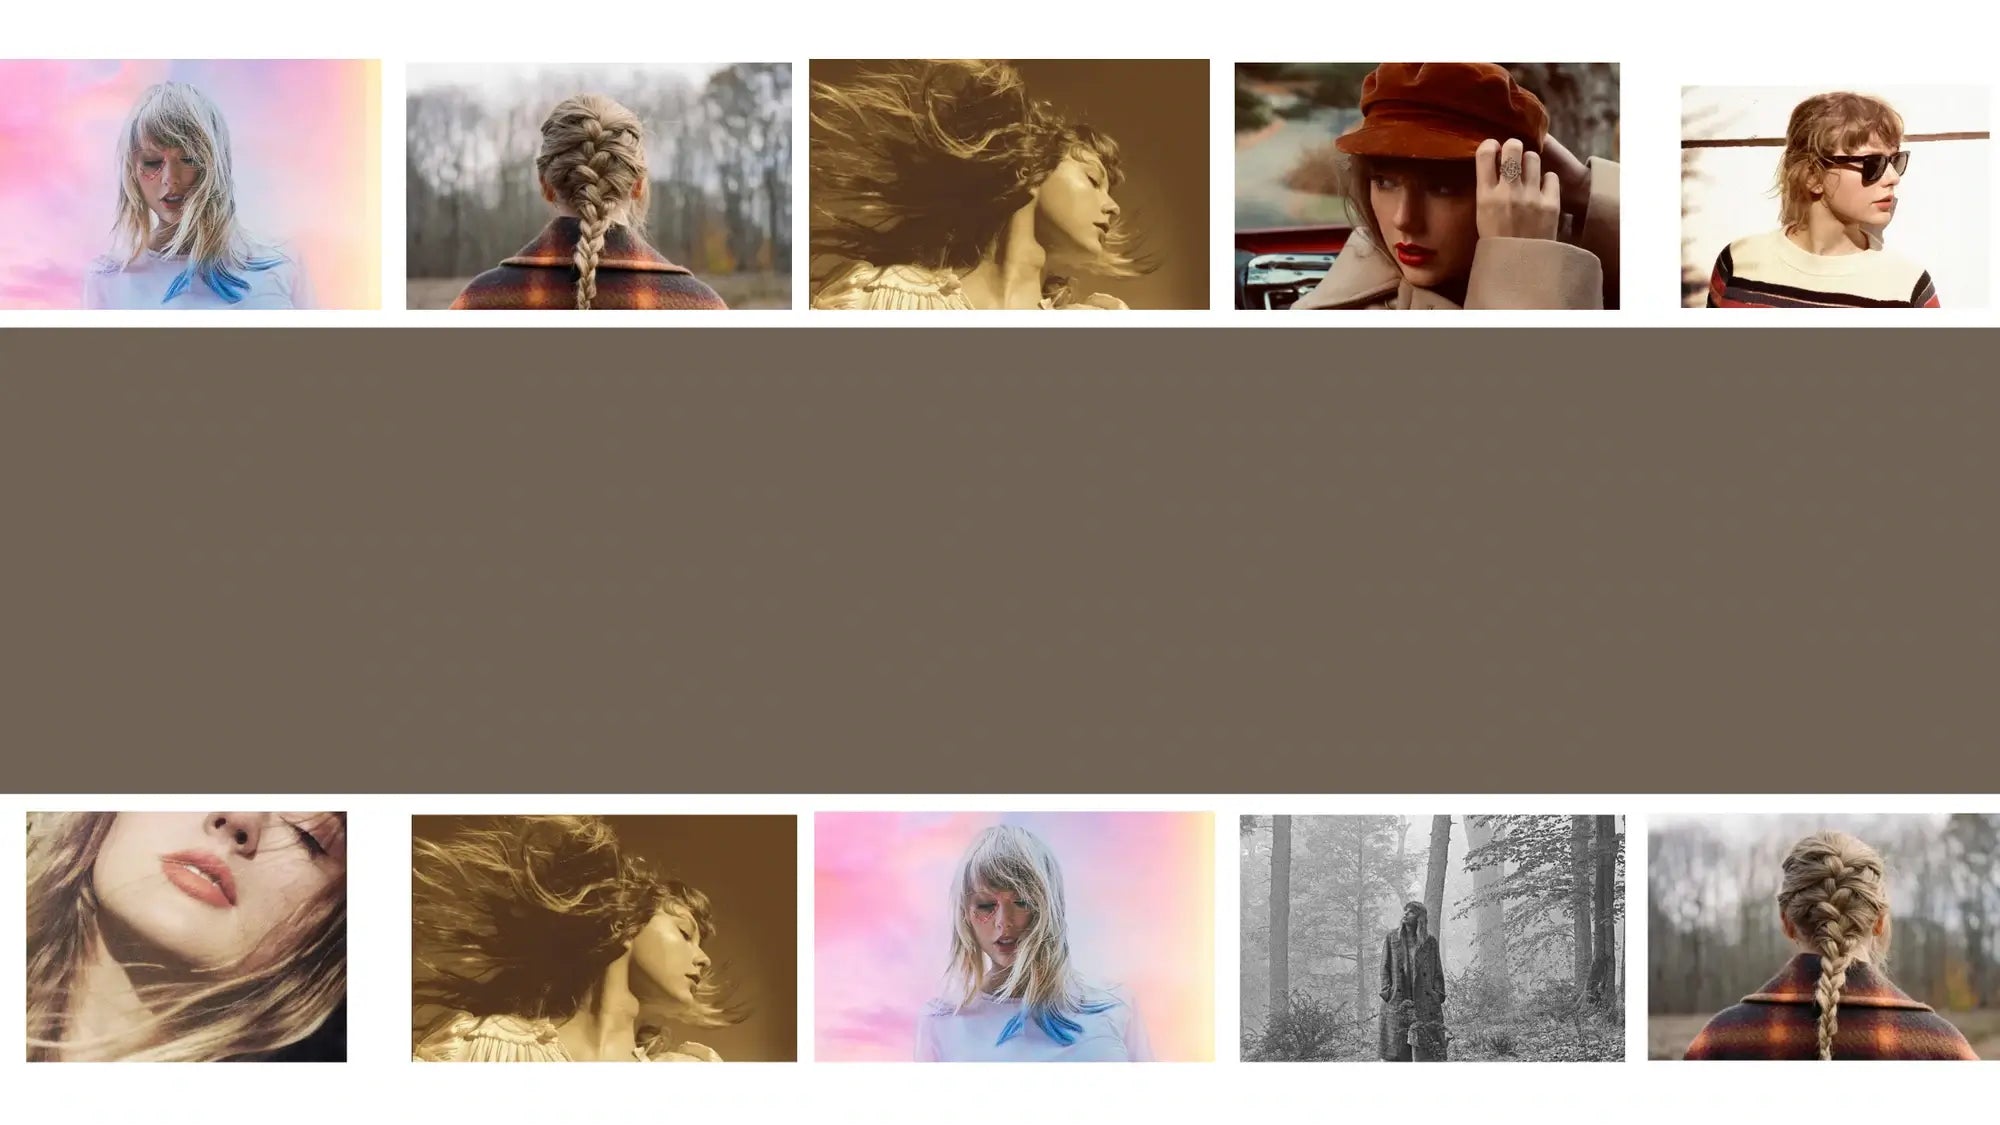 Which Flower are You Based on Taylor Swift's Album? (Taylor's Version)